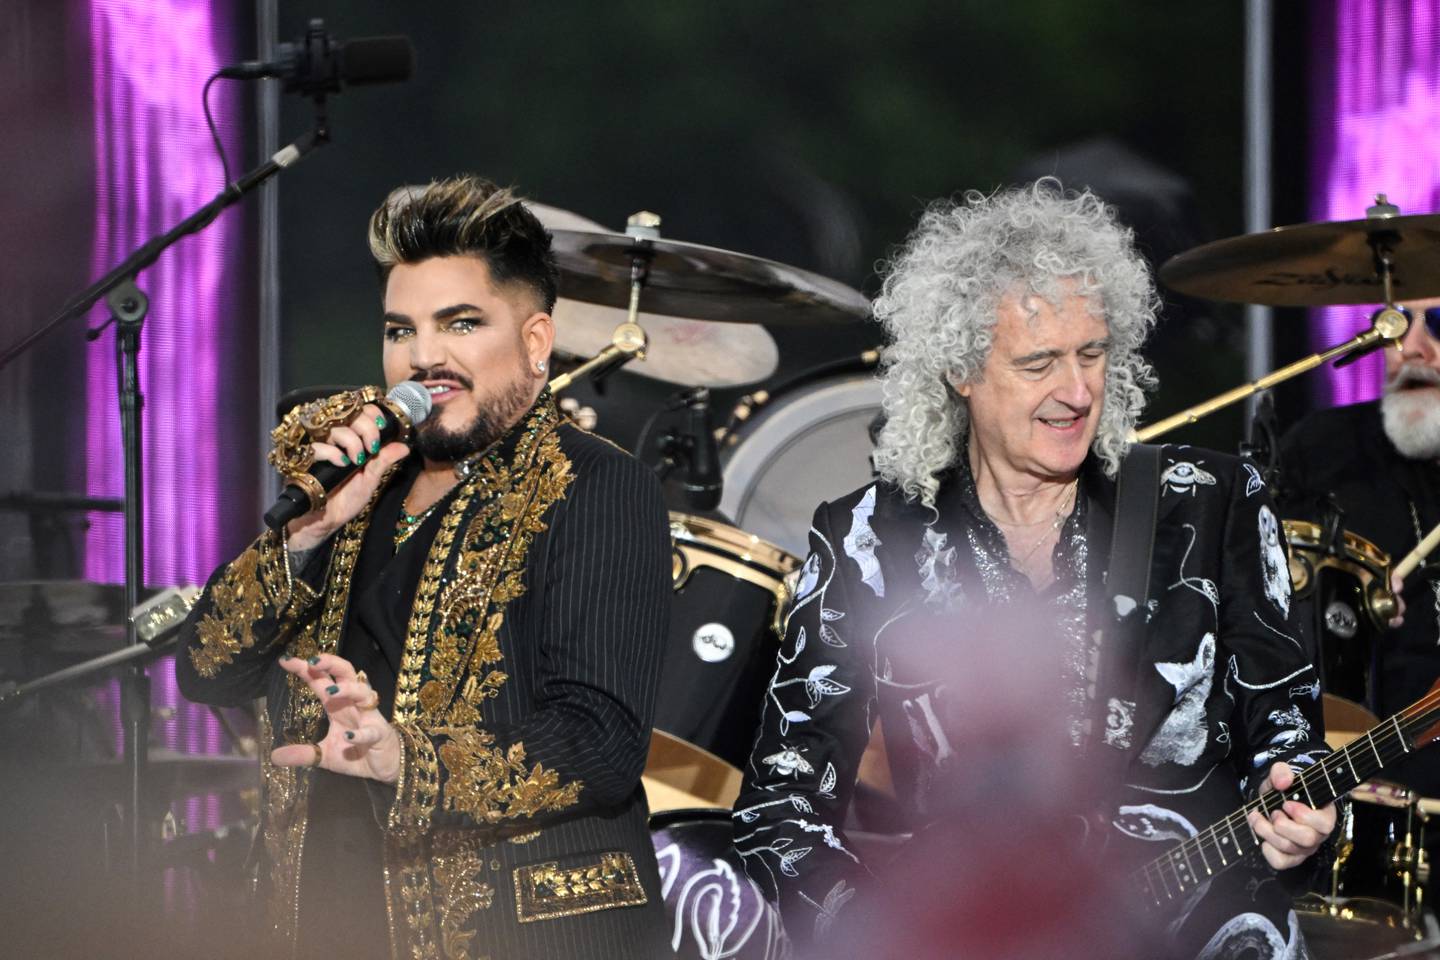 Adam Lambert: 'Good music is good music, and people want to be entertained'  – The Irish Times